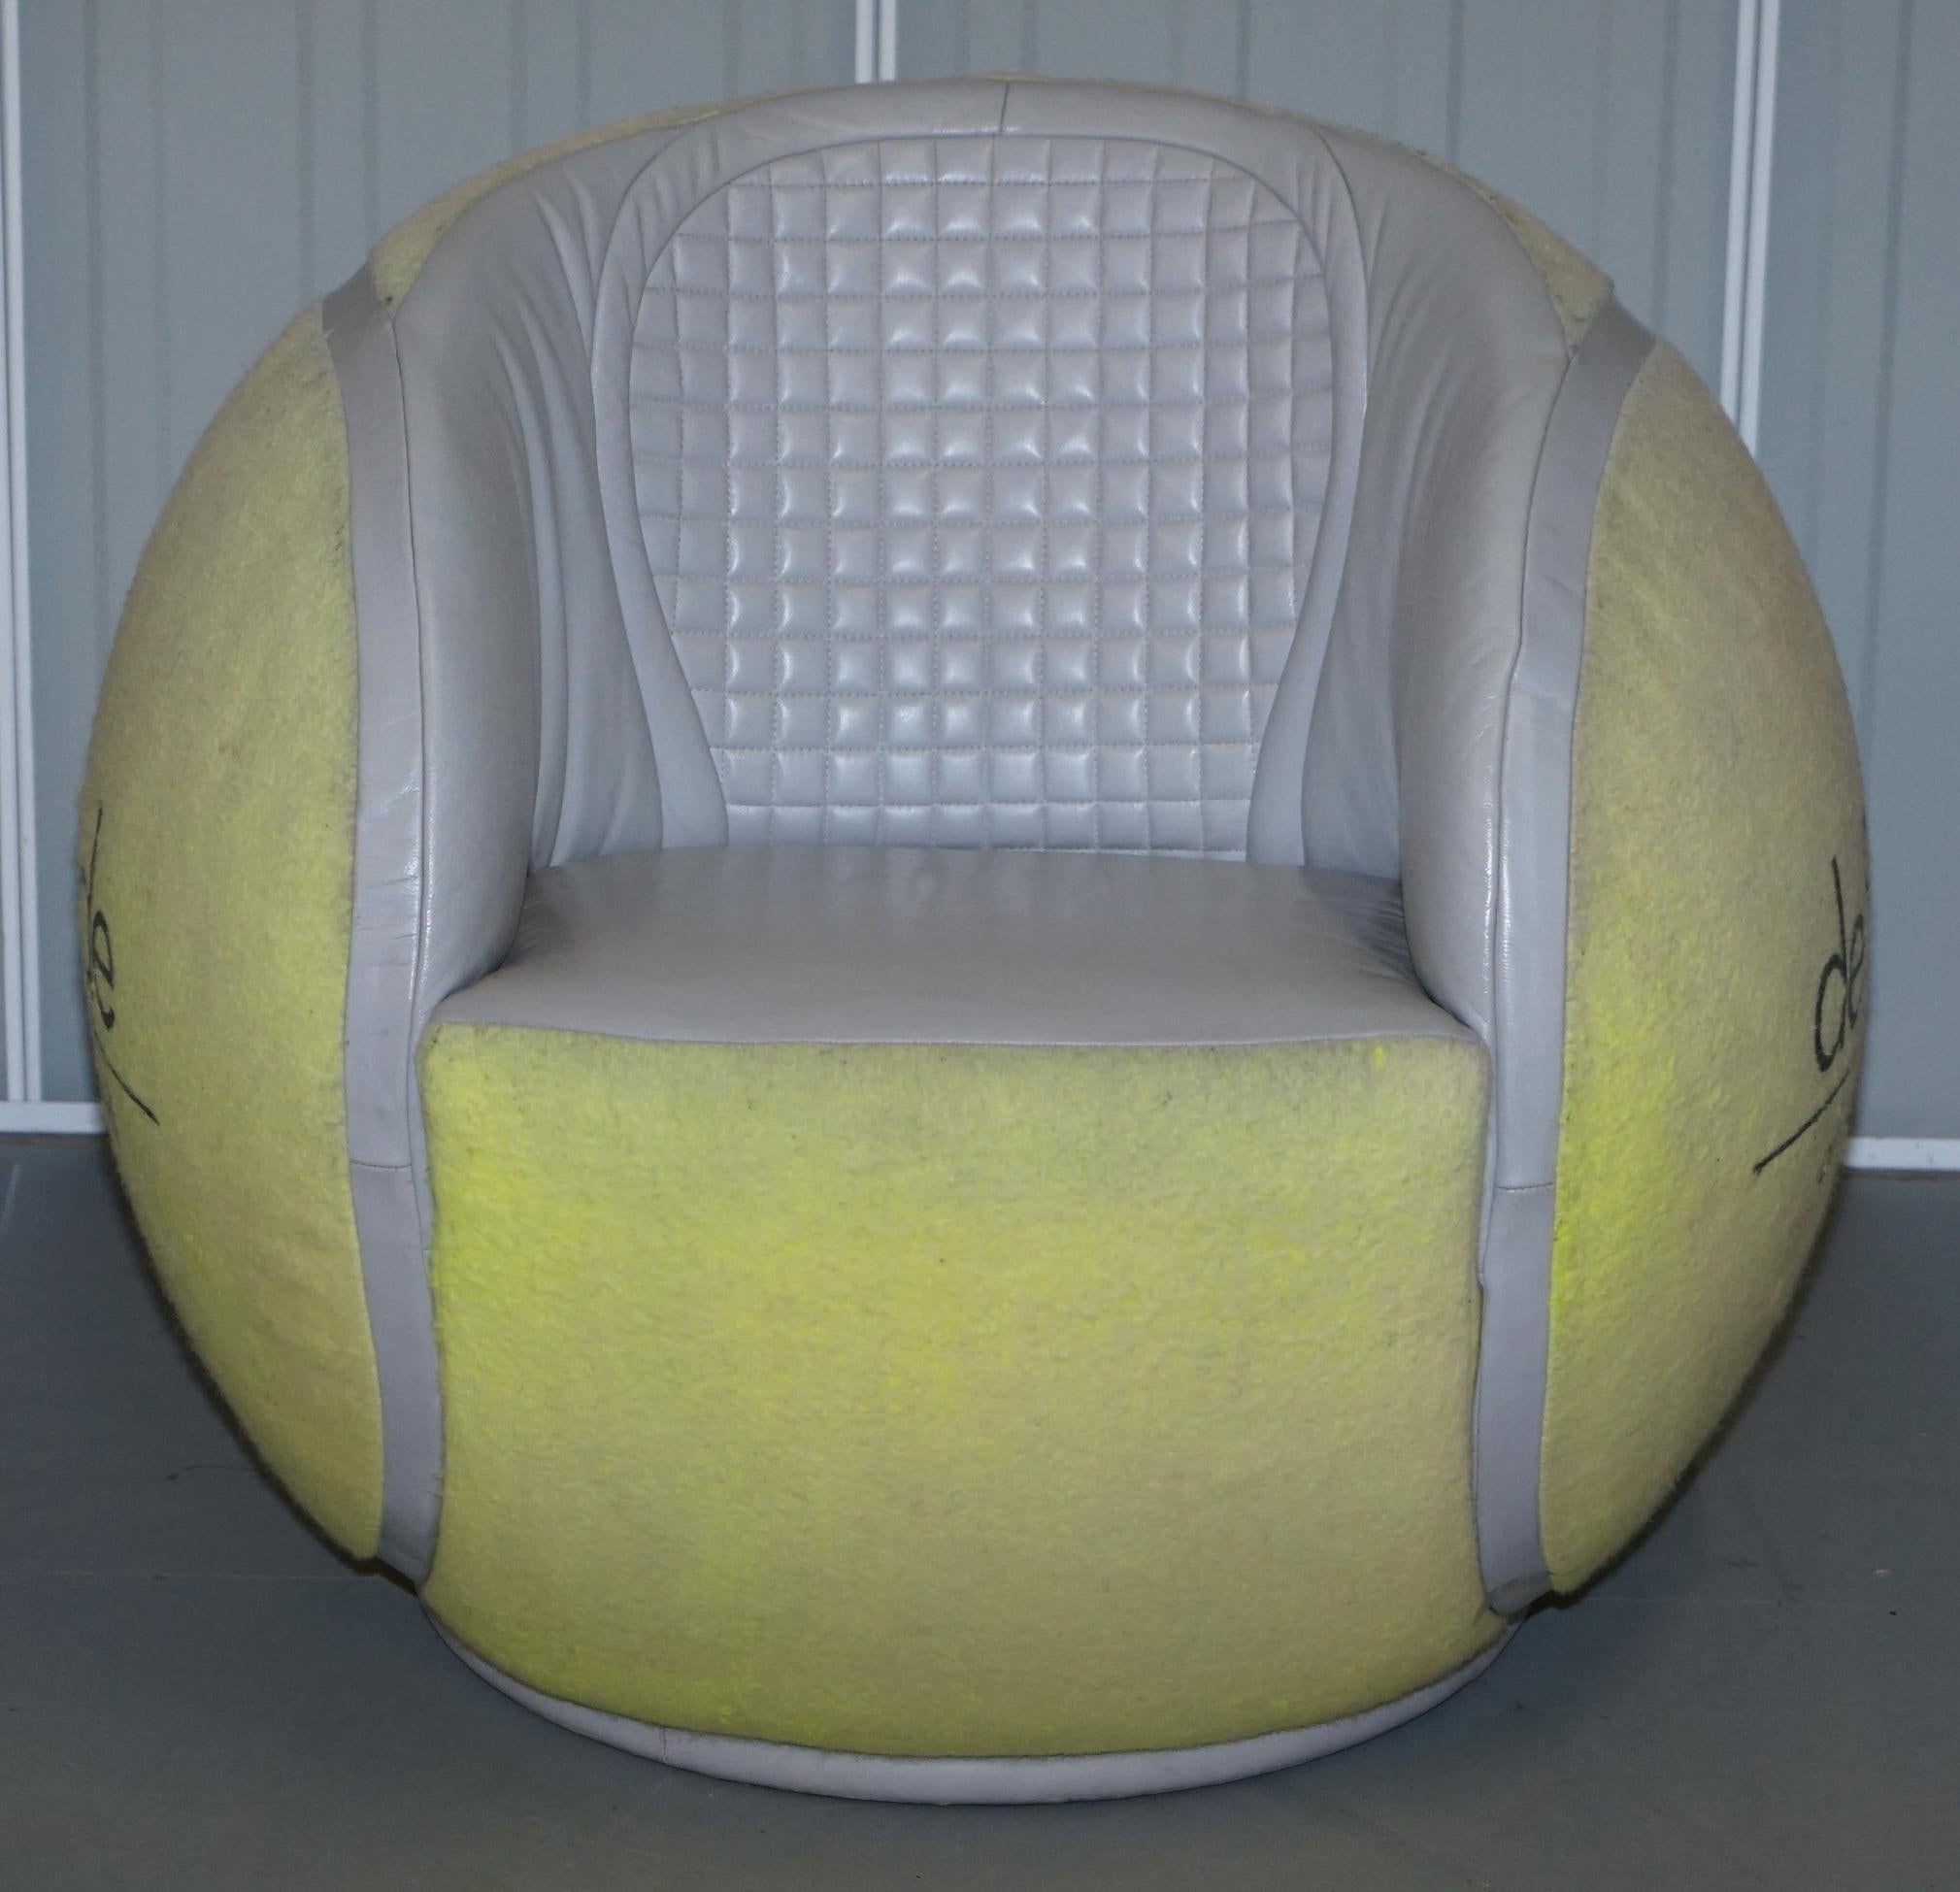 We are delighted to offer for sale this must have for any sports room De Sede 1985 Zurich open tennis ball armchair

A very rare and early find, this is one of the original period used pieces and not later reproduction chairs, this model was only